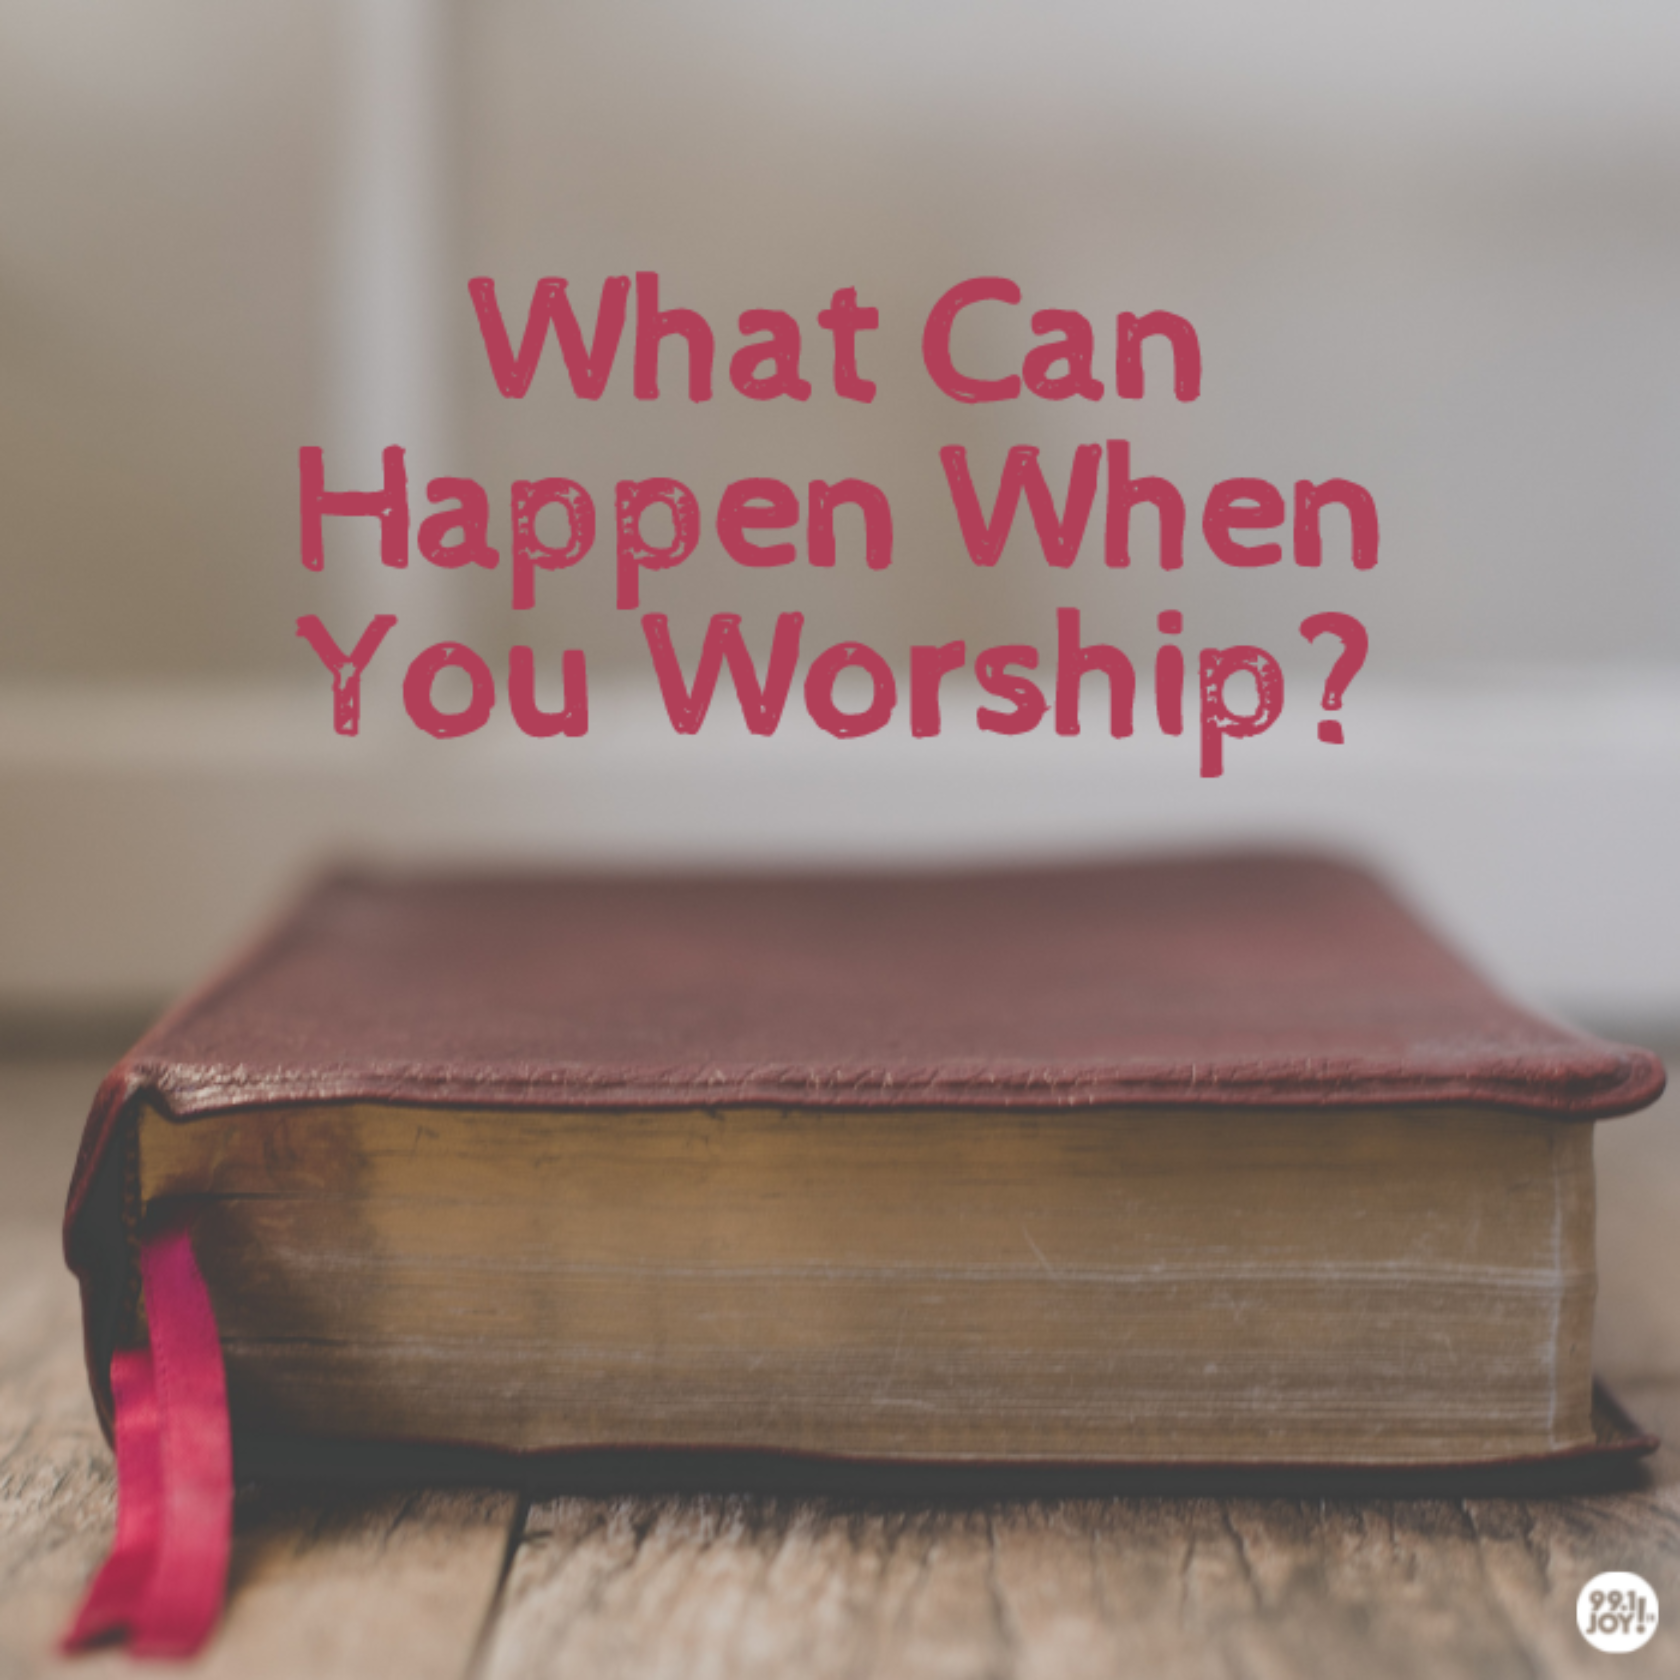 What Can Happen When You Worship?